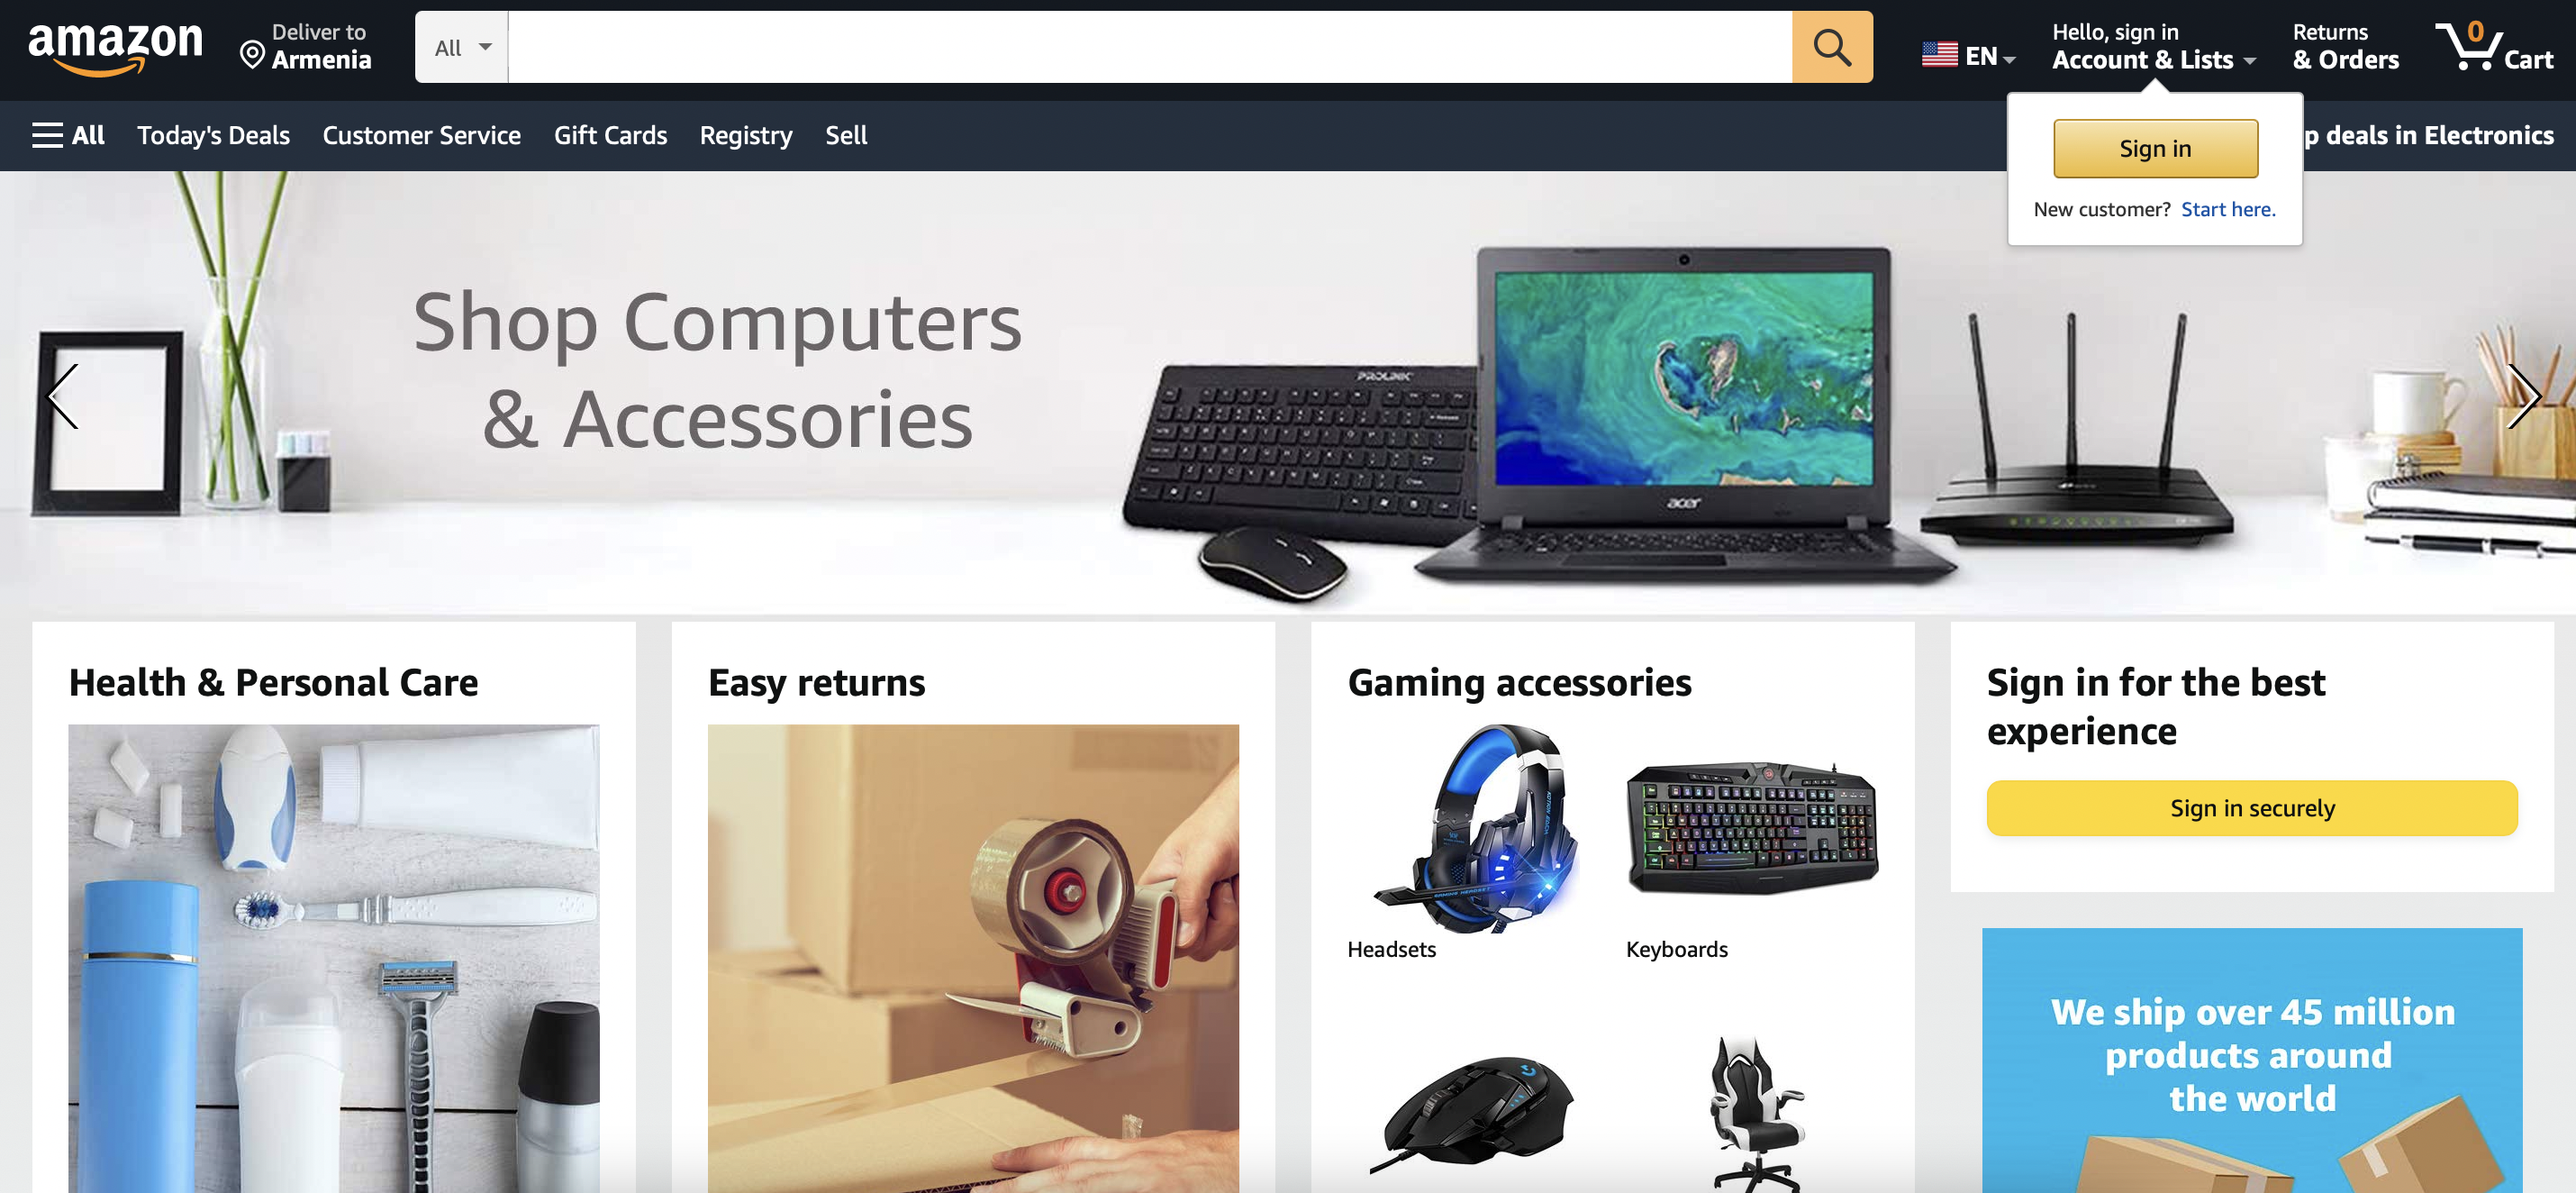 How to ungate restricted categories on Amazon?